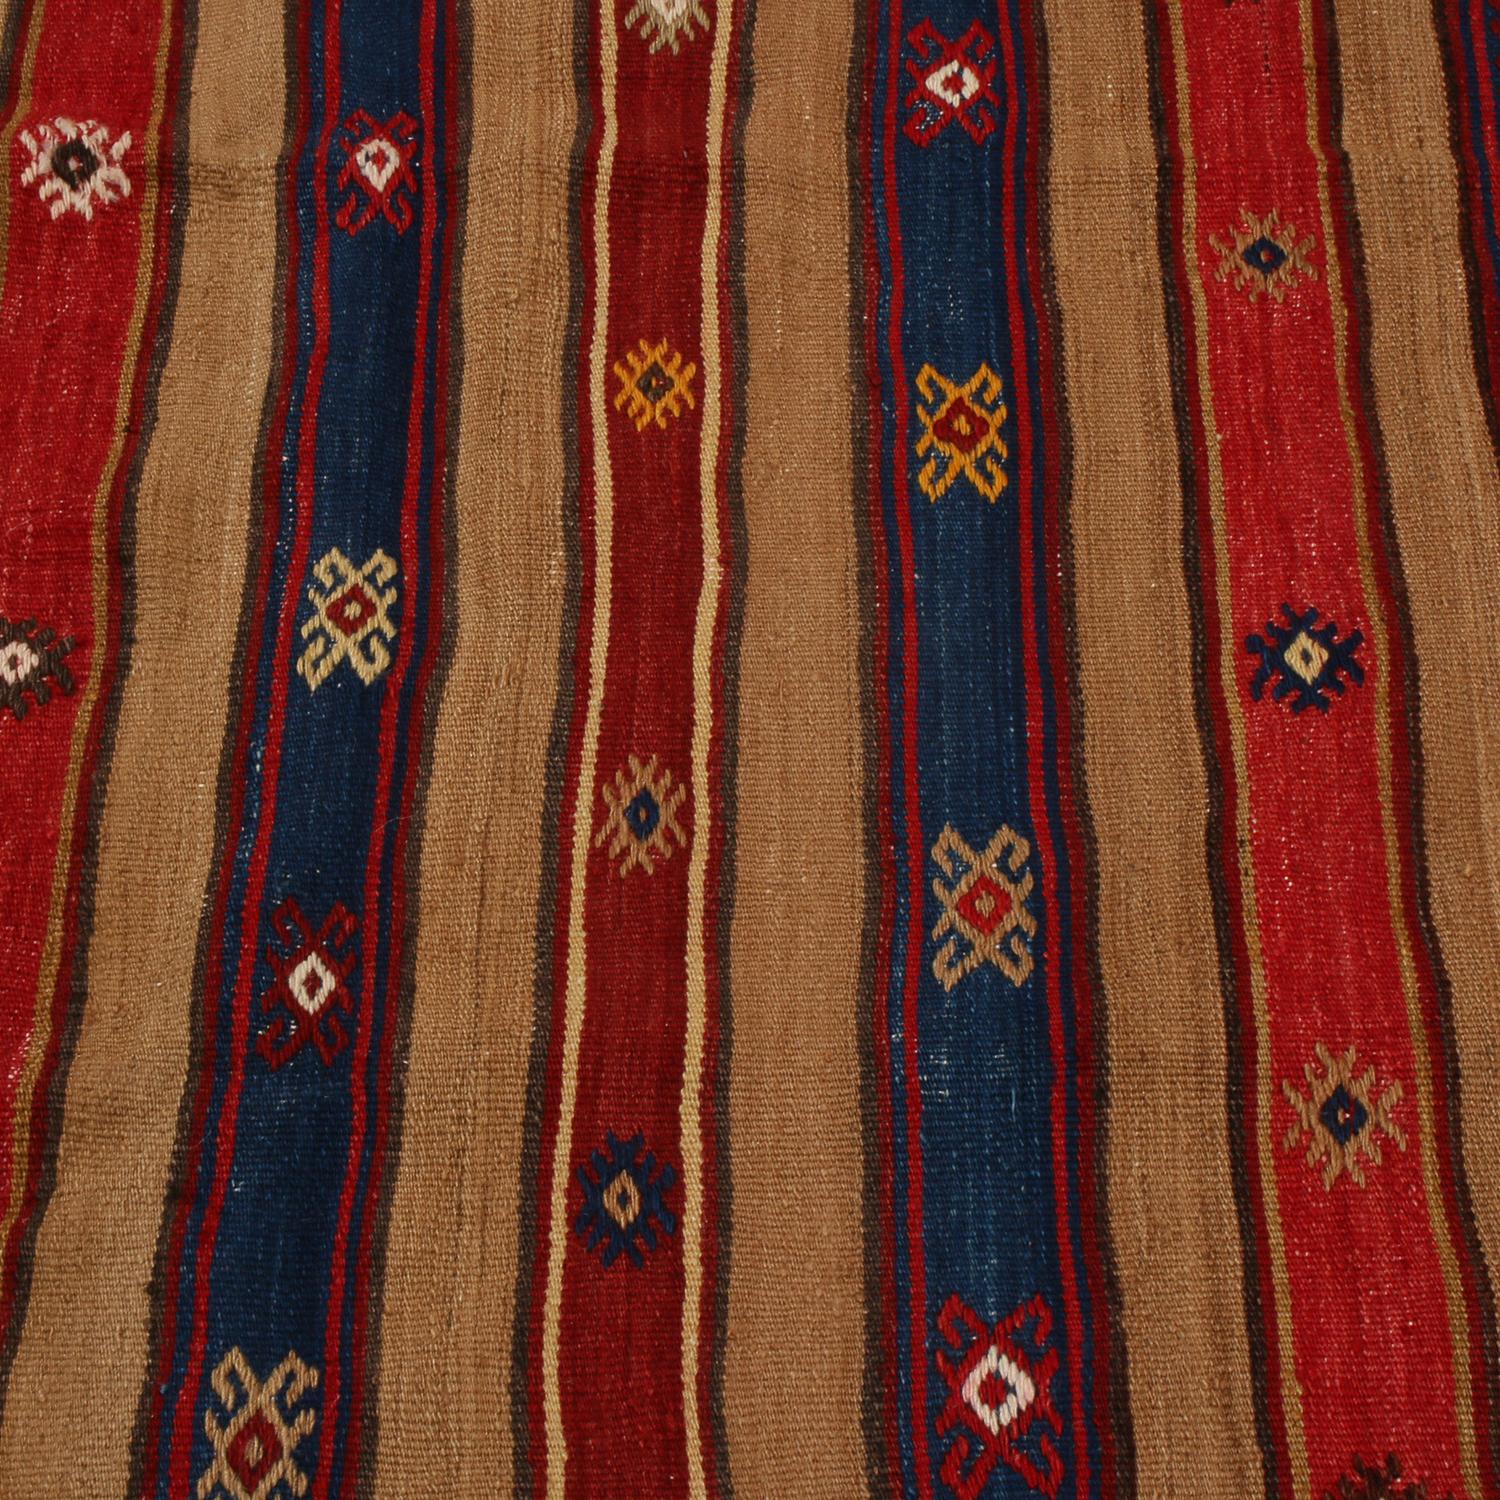 Flat-woven in high-quality wool originating from Turkey between 1930-1940, this vintage Fathiye Kilim rug enjoys exceptional condition and an inviting balance of warmth and richness in its beige-brown, multi-tonal tangerine and russet red, and navy